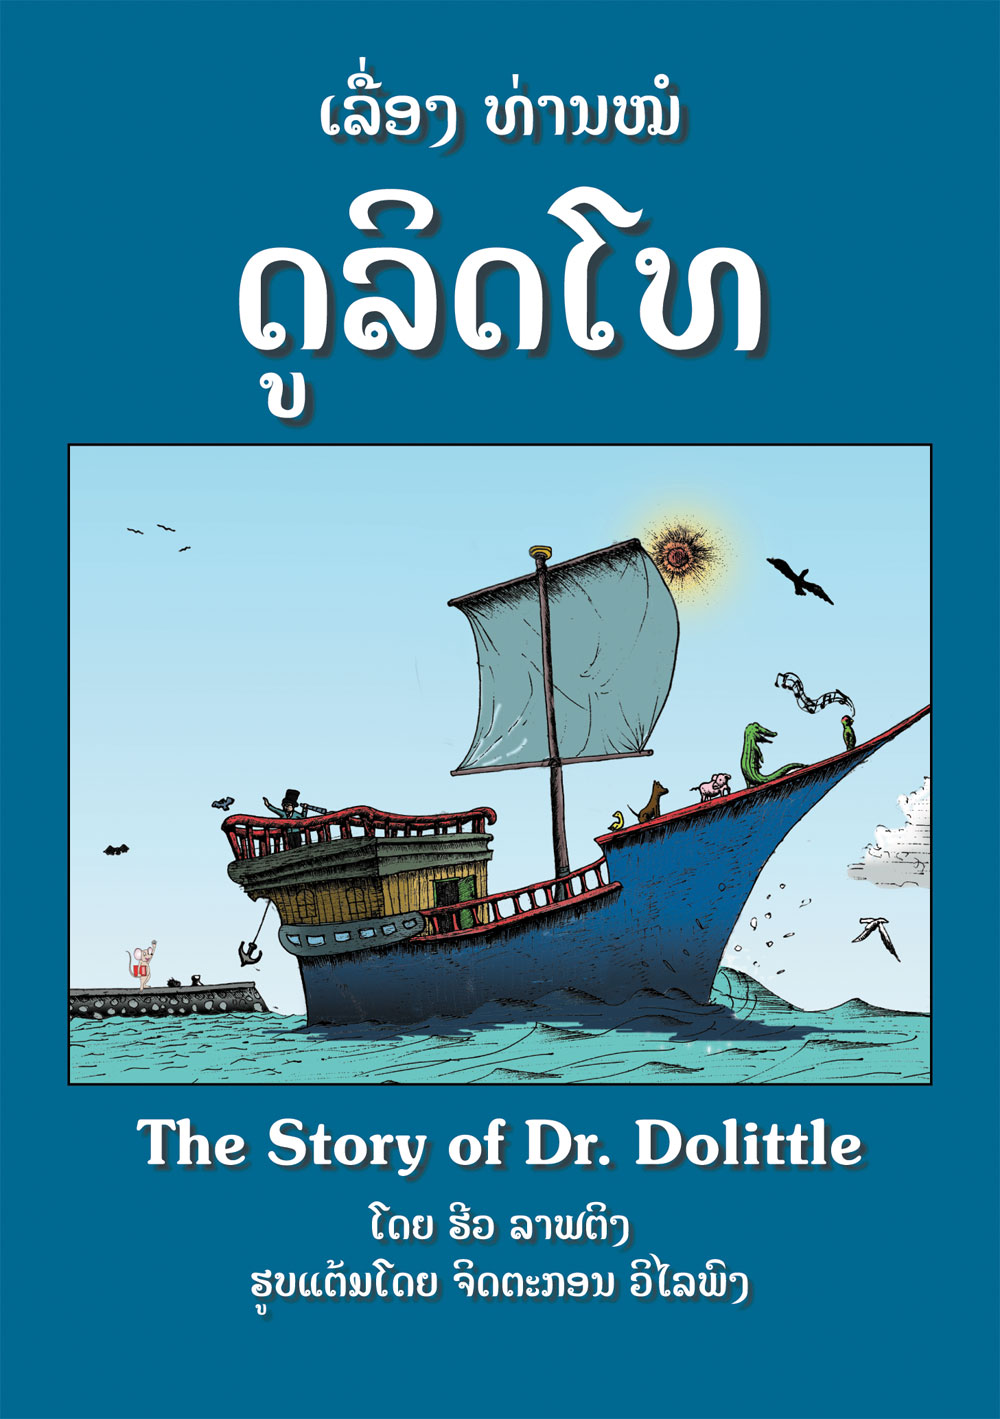 The Story of Dr. Dolittle large book cover, published in Lao and English